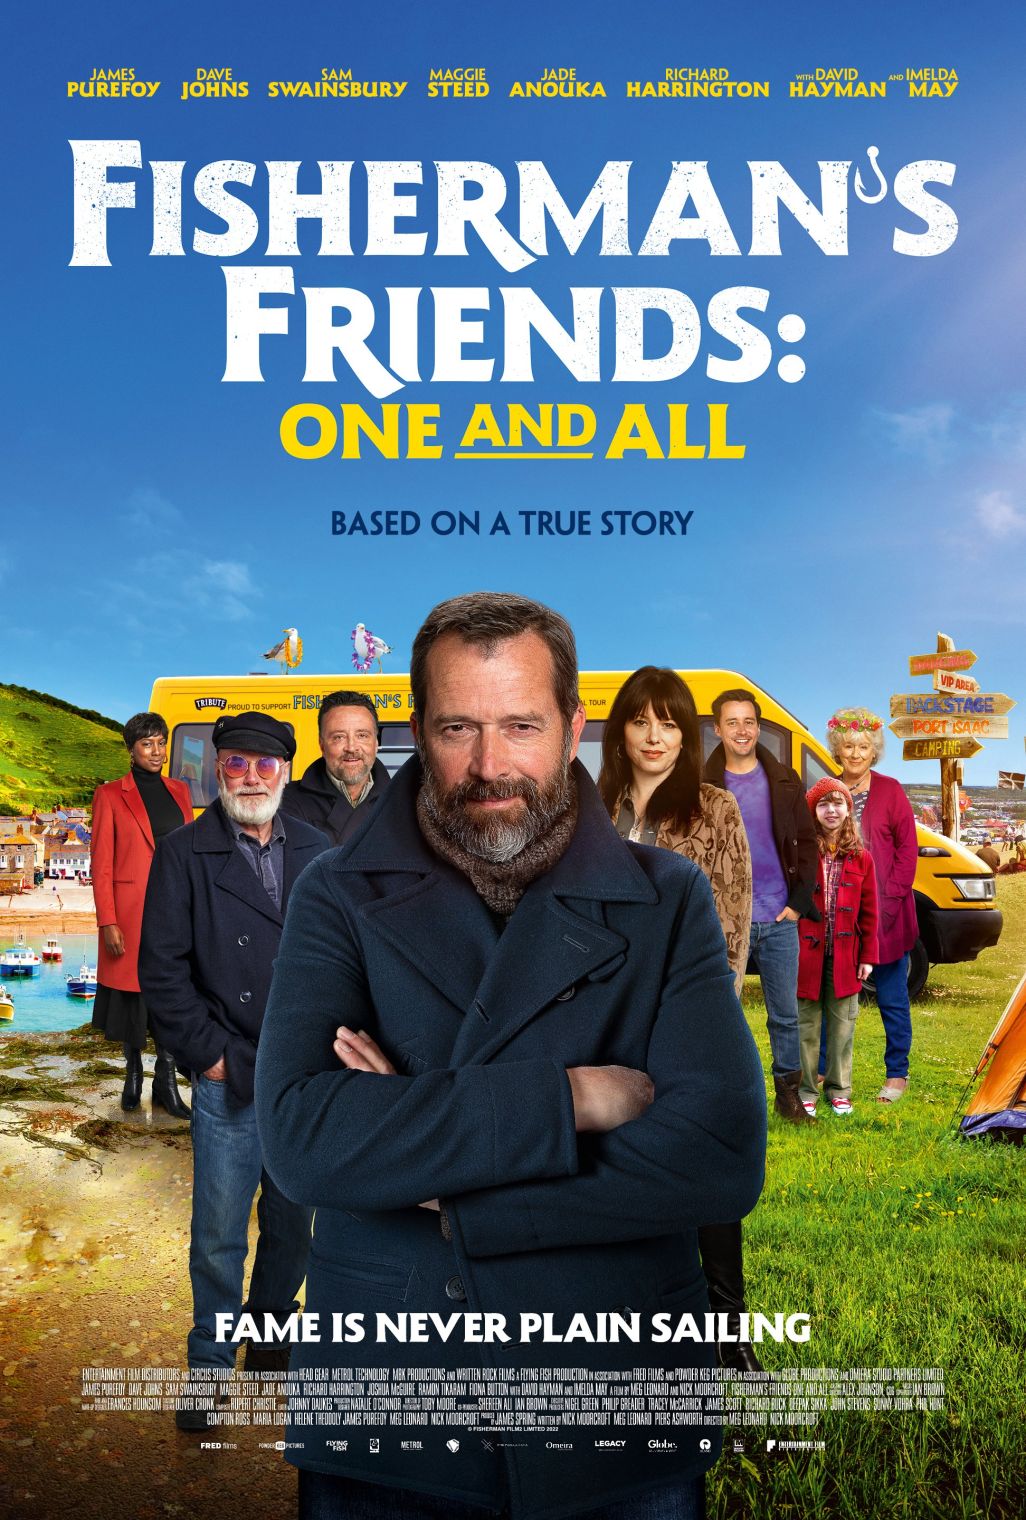 Richard Harrington stars as new band member Morgan in 'Fisherman’s Friends: One and All’ which will be released on 19th August. 